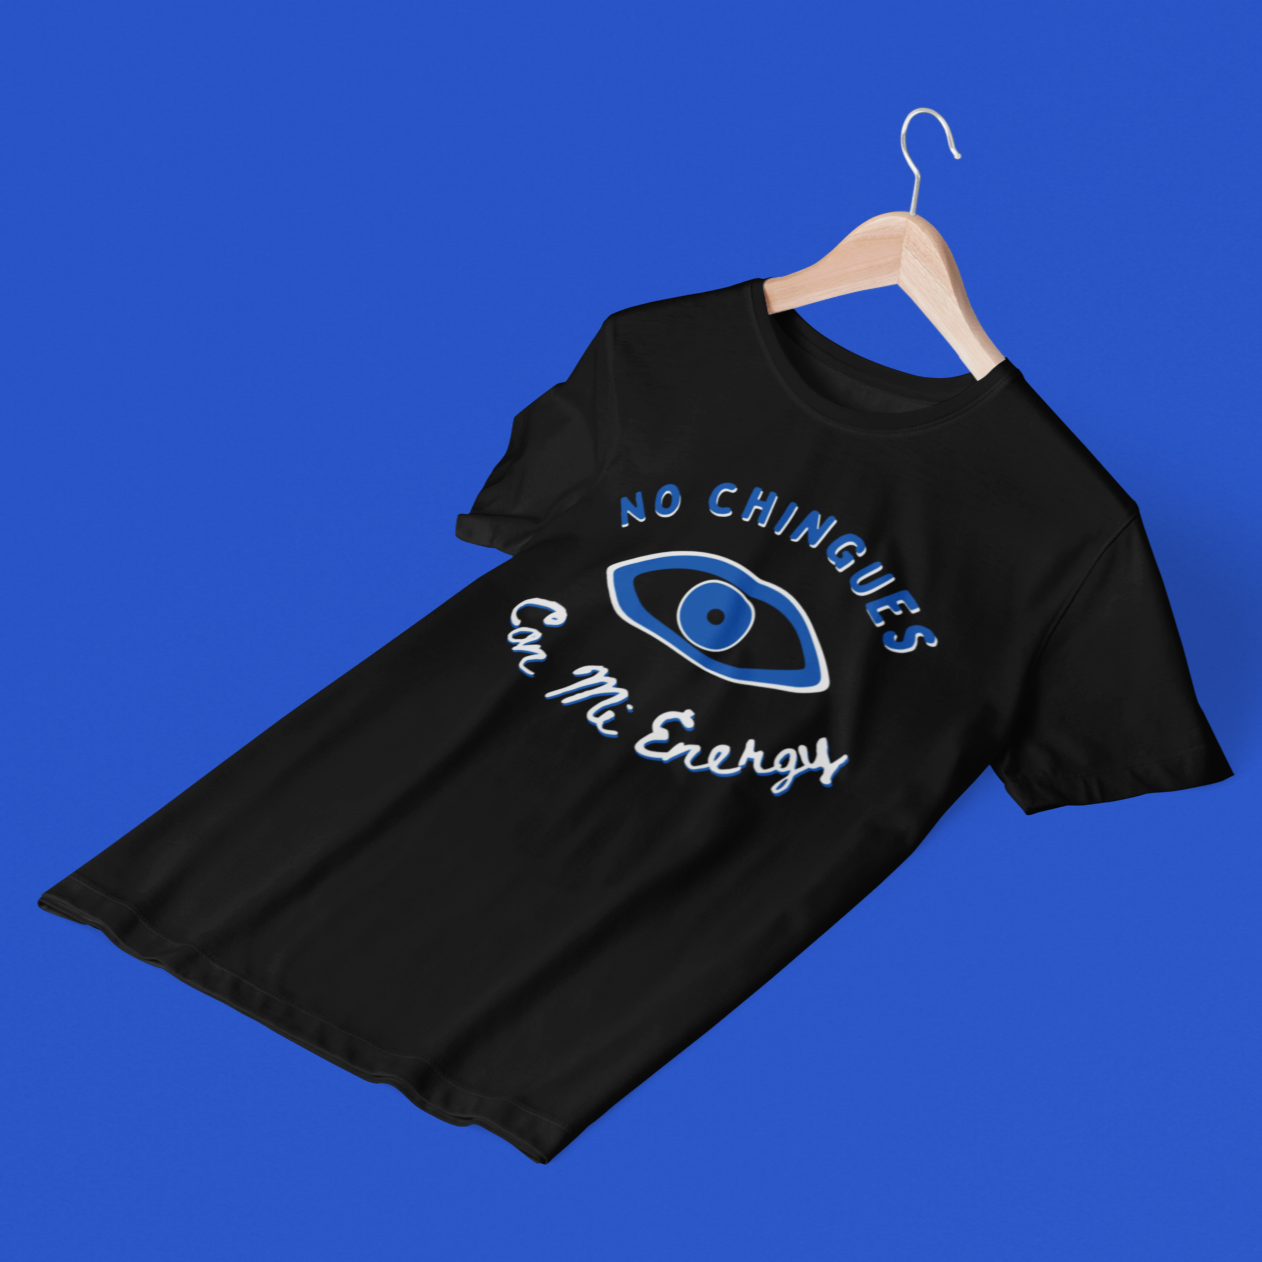 Black t-shirt for latinas with evil eye graphic and text 'no chingues con mi energy'